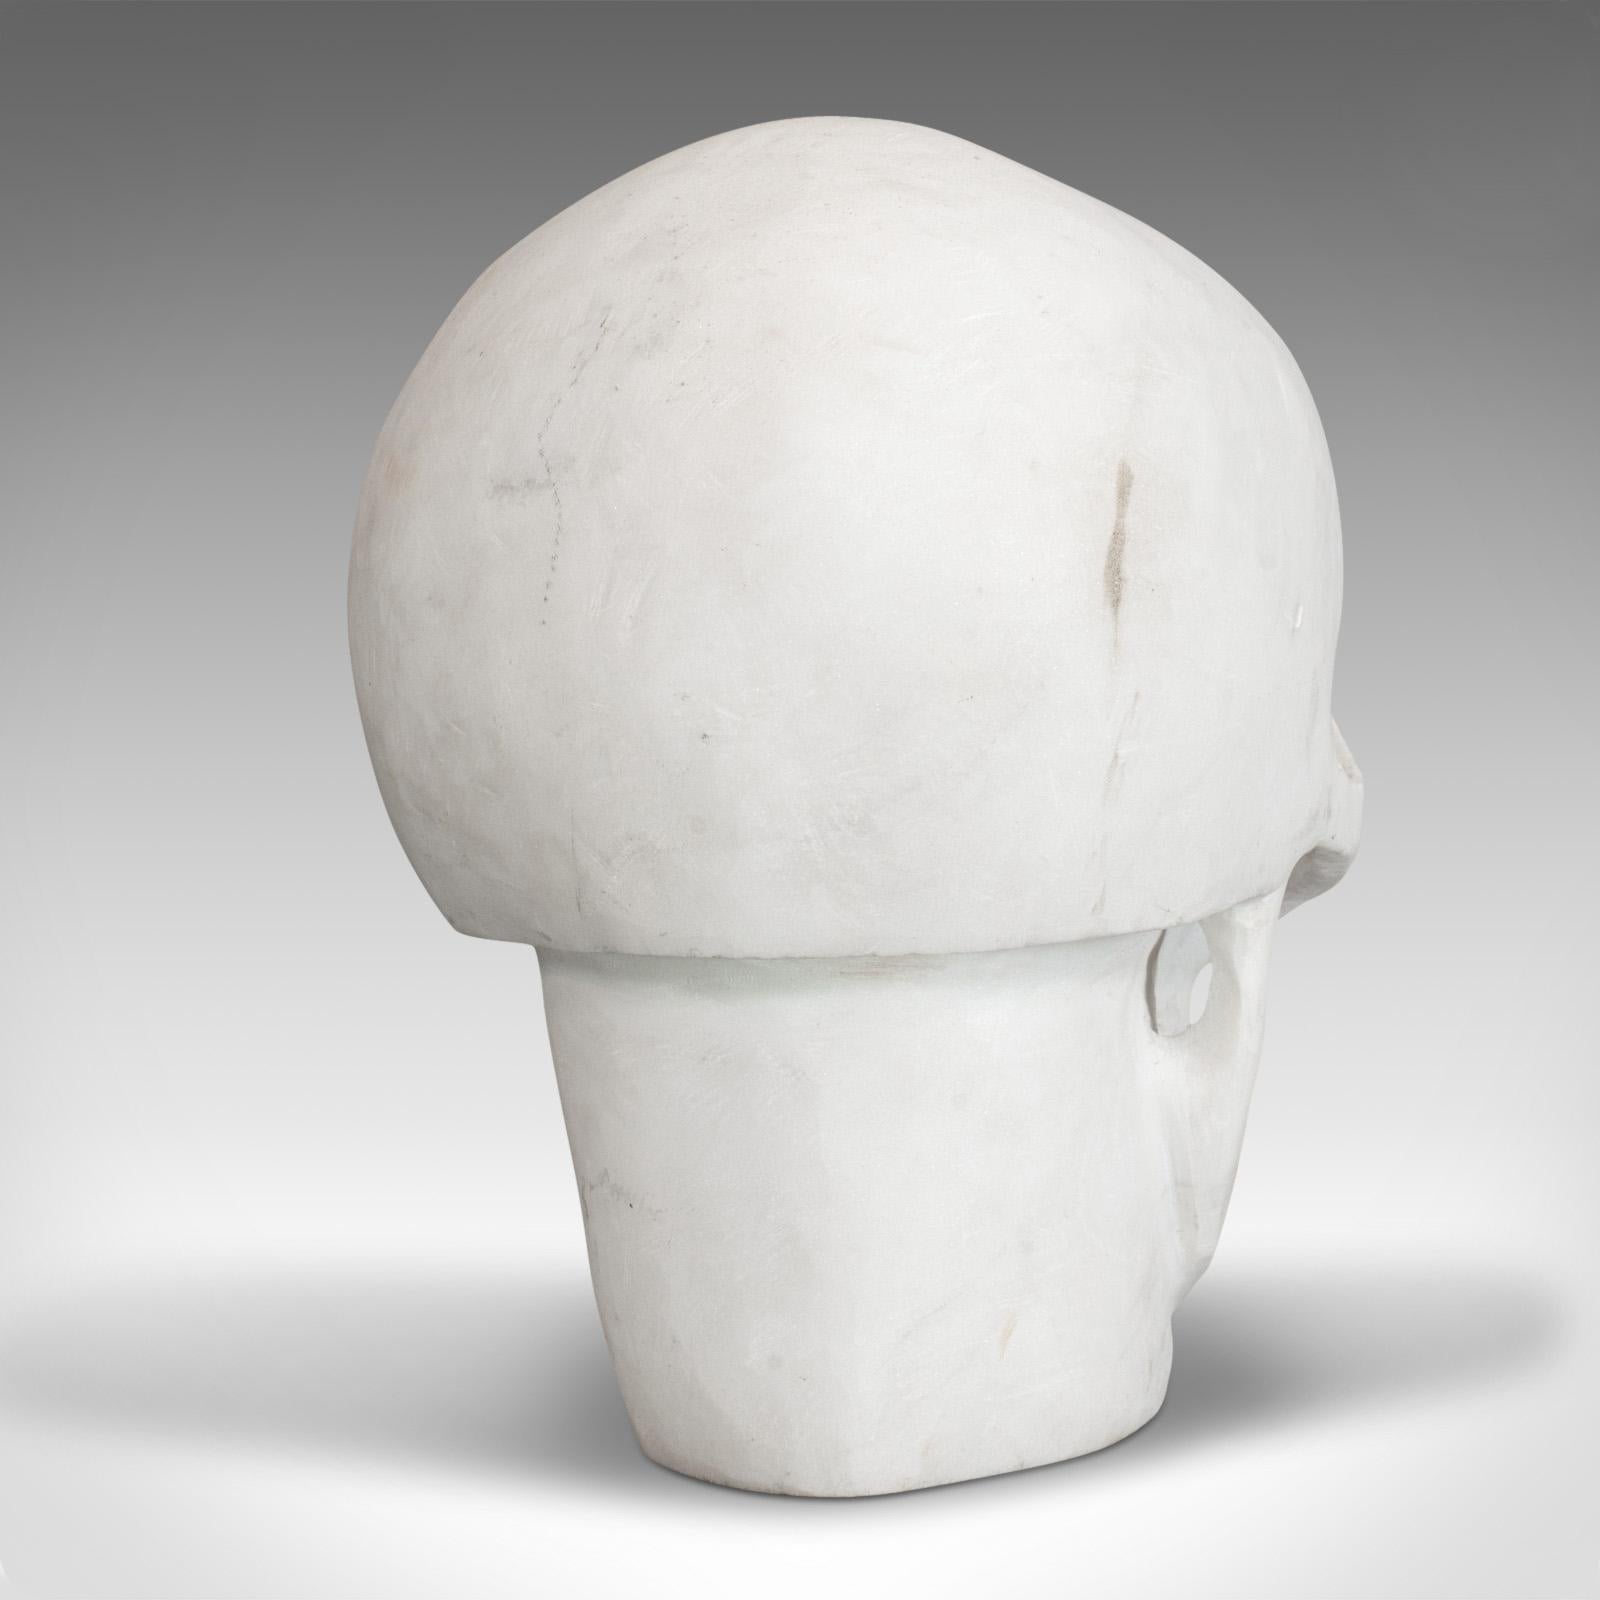 Vintage Decorative Skull, English, White Marble, Desk, Ornament, Paperweight For Sale 1